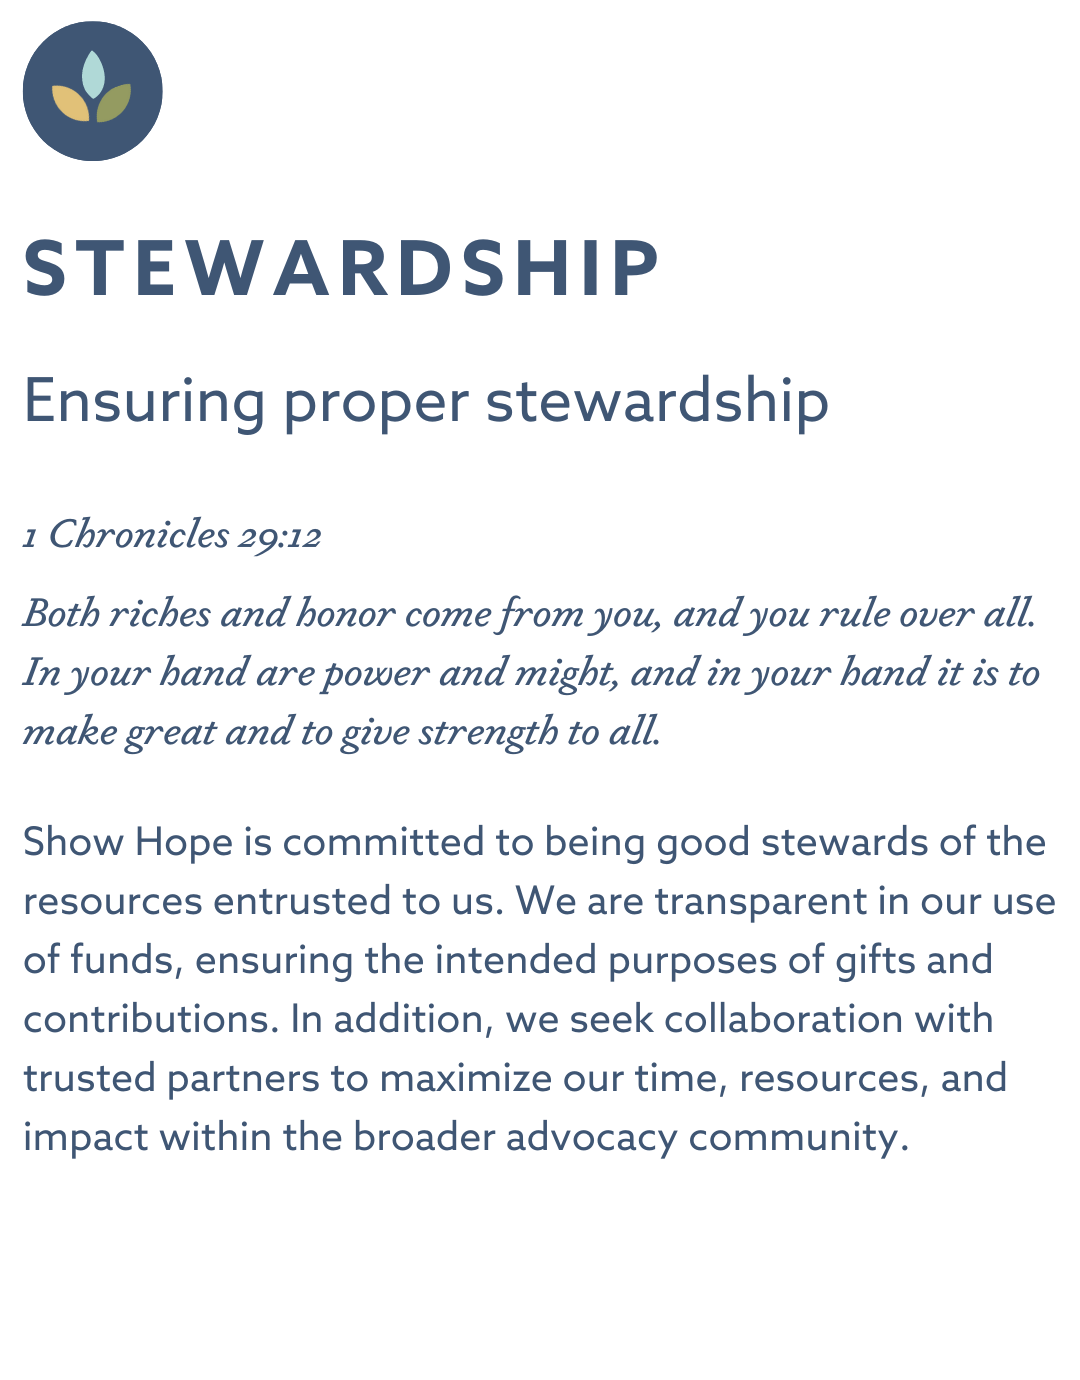 STEWARDSHIP Ensuring proper stewardship 1 Chronicles 29:12 “Both riches and honor come from you, and you rule over all. In your hand are power and might, and in your hand it is to make great and to give strength to all.” Show Hope is committed to being good stewards of the resources entrusted to us. We are transparent in our use of funds, ensuring the intended purposes of gifts and contributions. In addition, we seek collaboration with trusted partners to maximize our time, resources, and impact within the broader advocacy community.